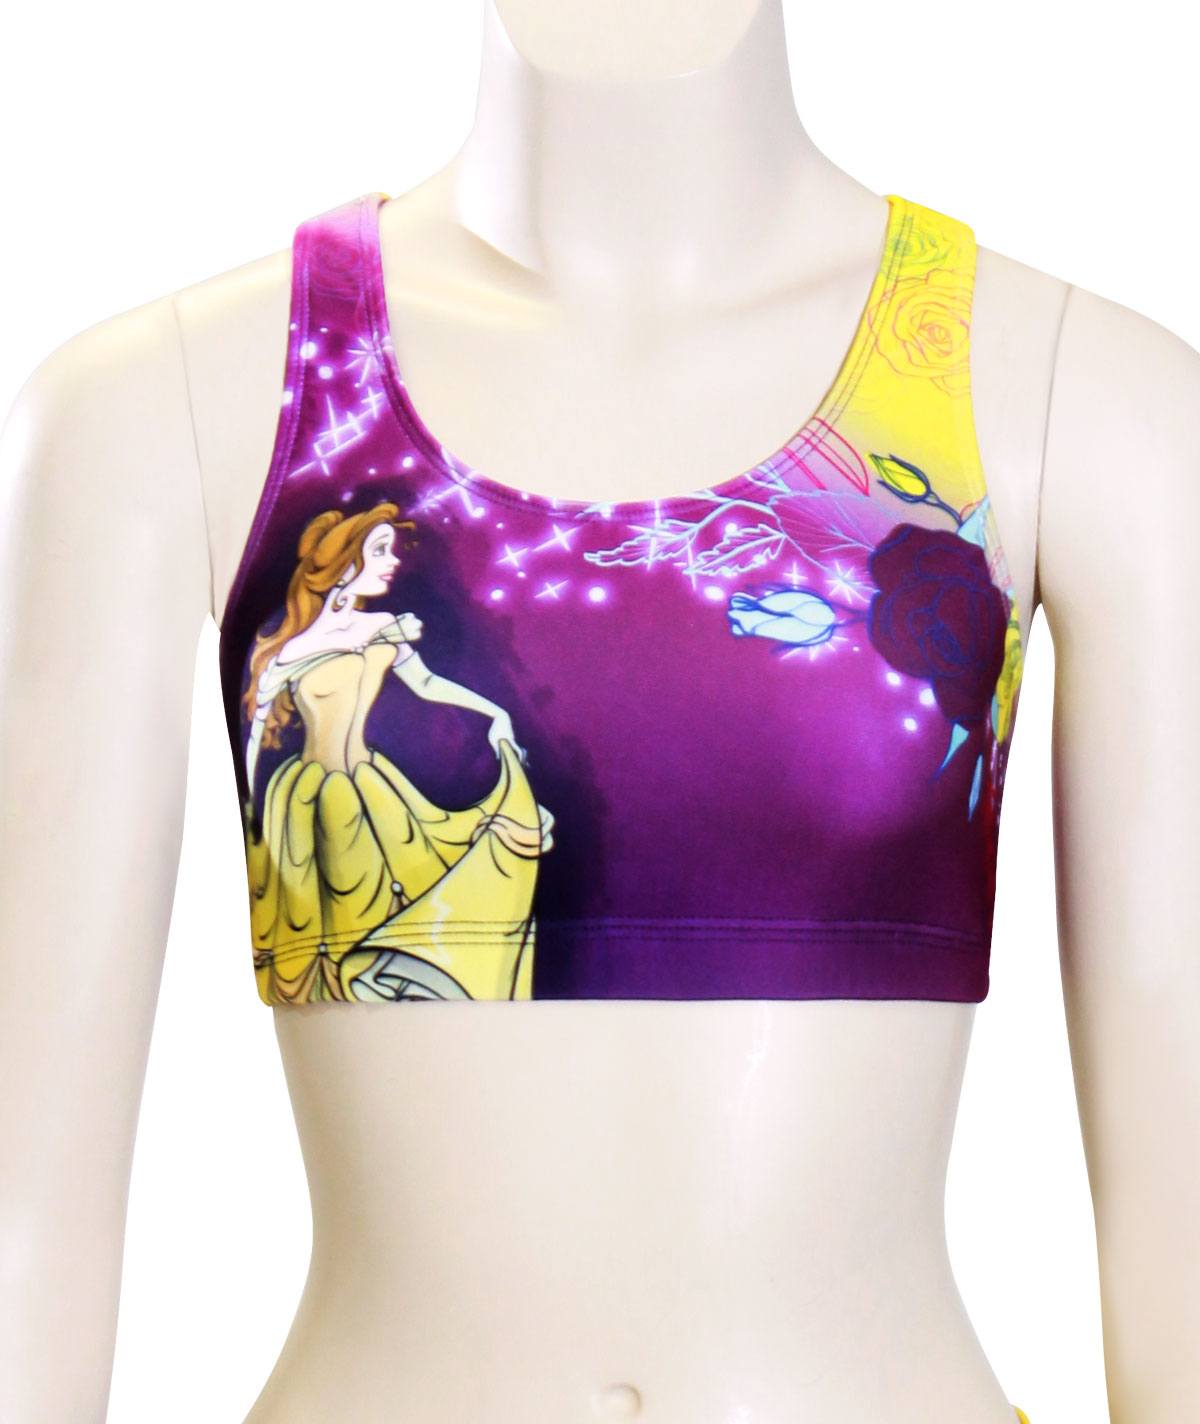 GK All Star Beauty and the Beast Cheer Crop Top